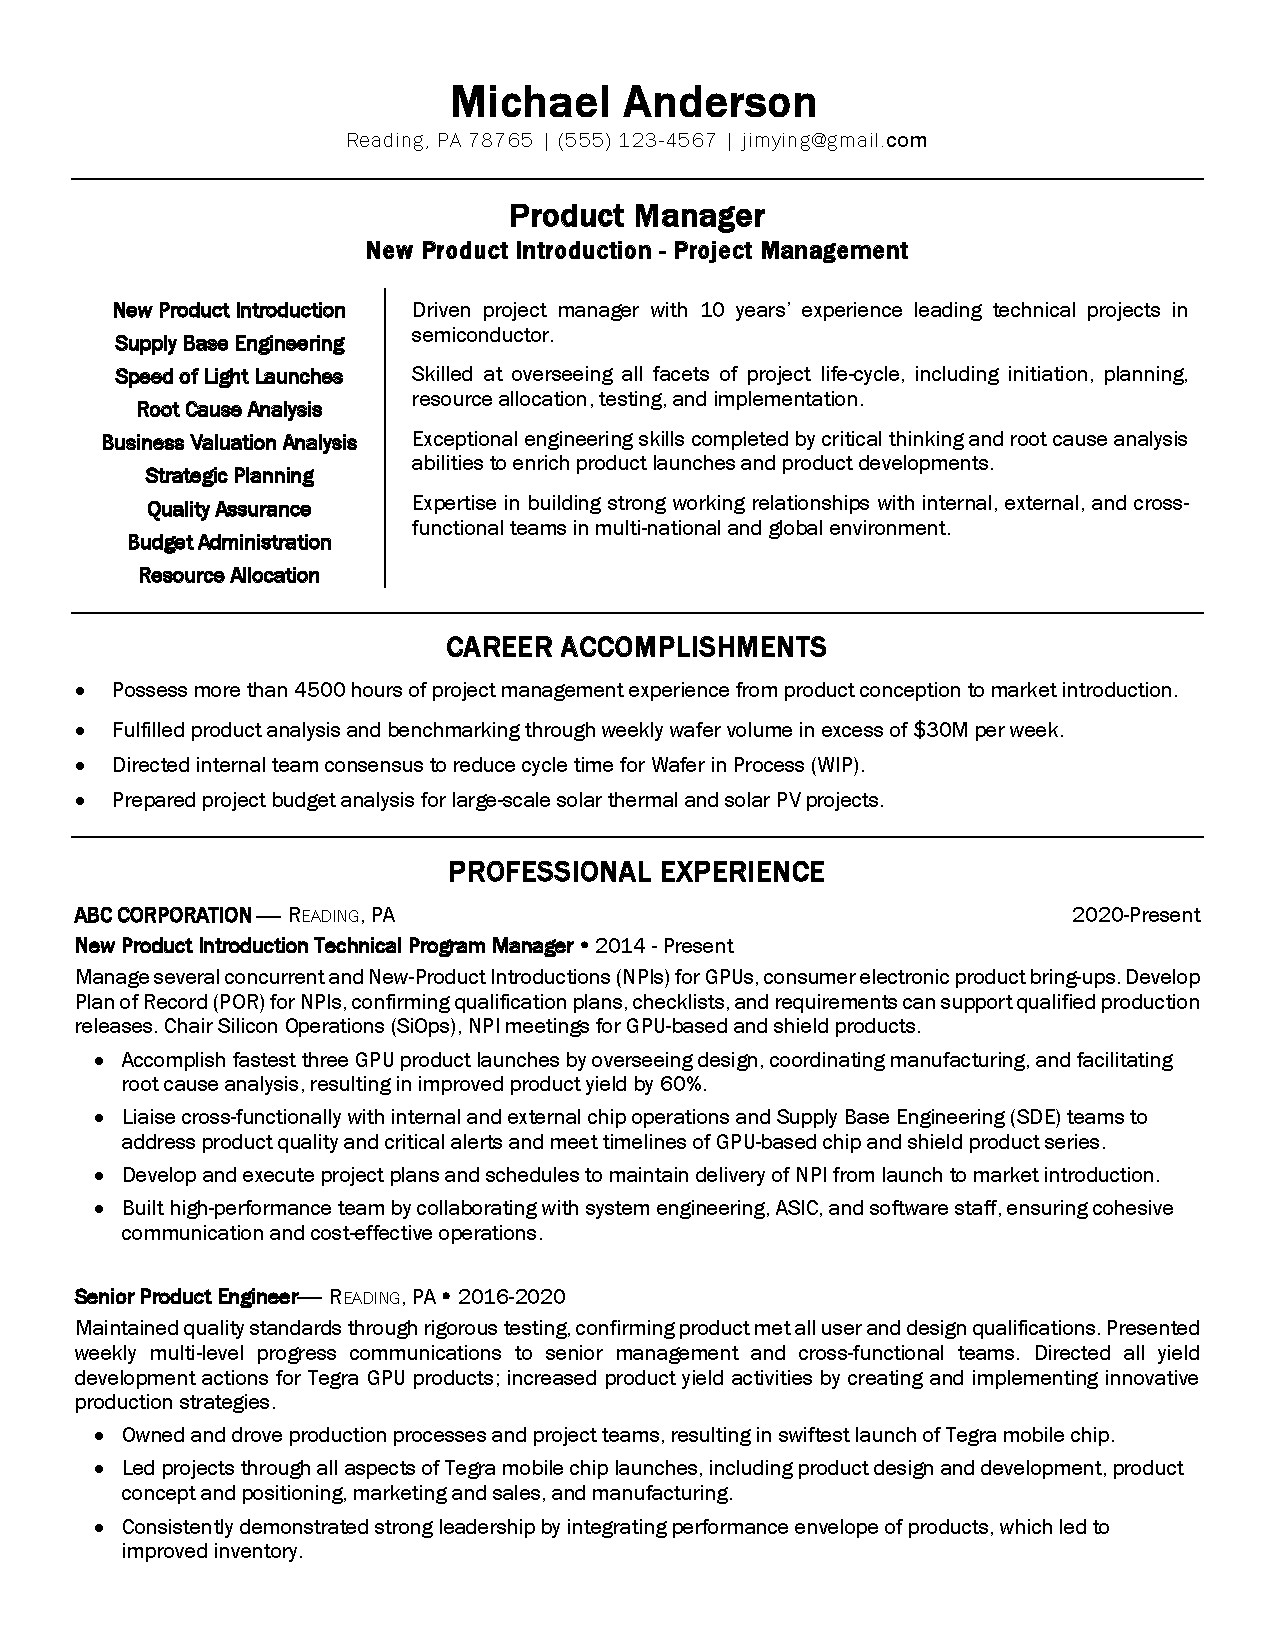 00016 product manager resume example Page 1